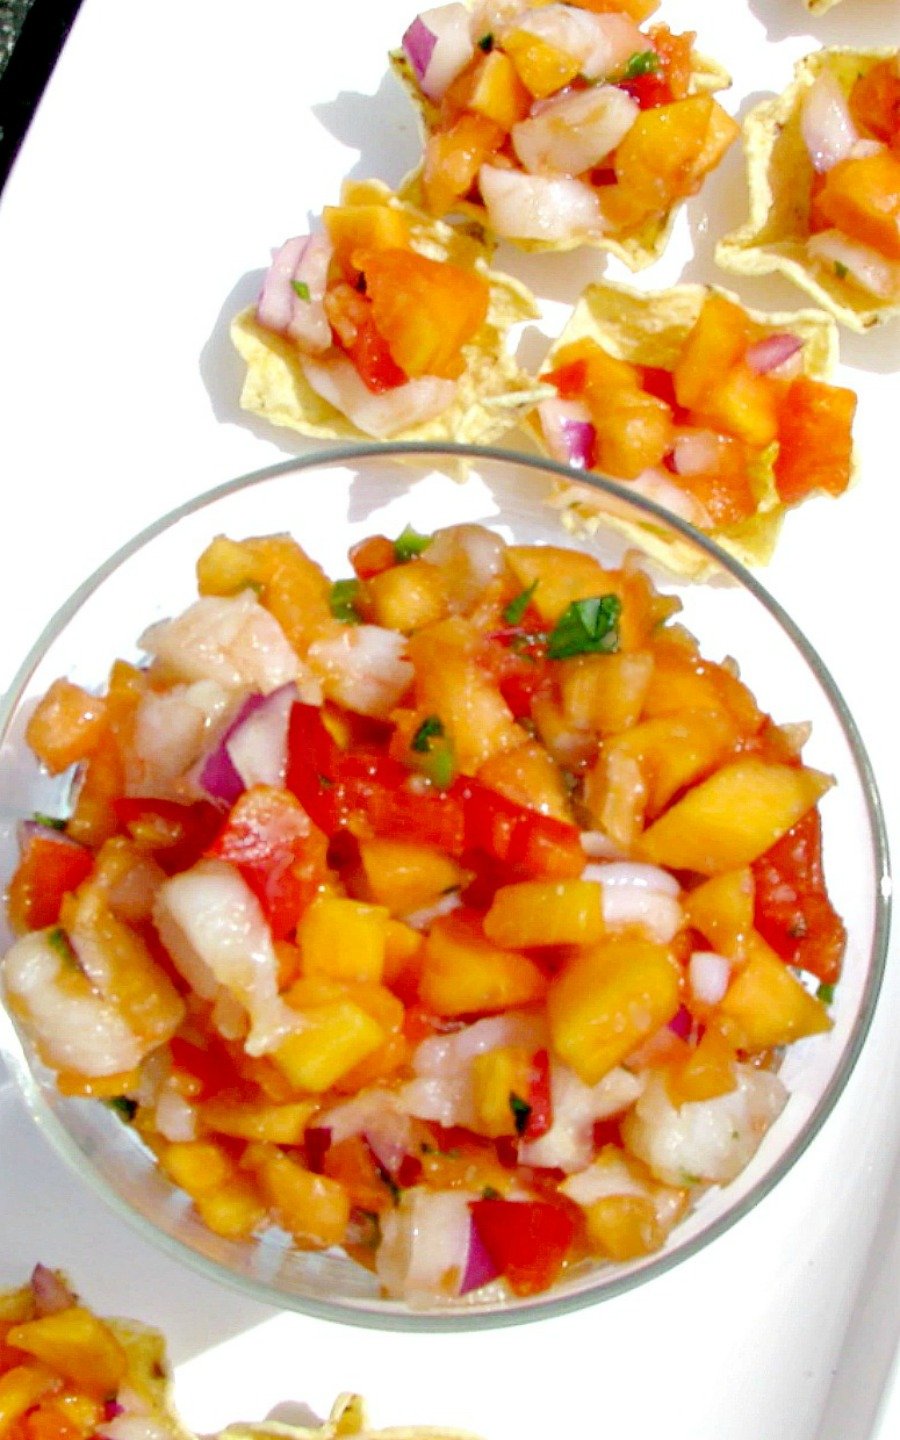 Shrimp and Papaya Salsa- Sweet papaya, chopped shrimp, onions, and jalapeno give you all the great tastes of summer. This recipe feeds a crowd, great for summertime cookouts! 